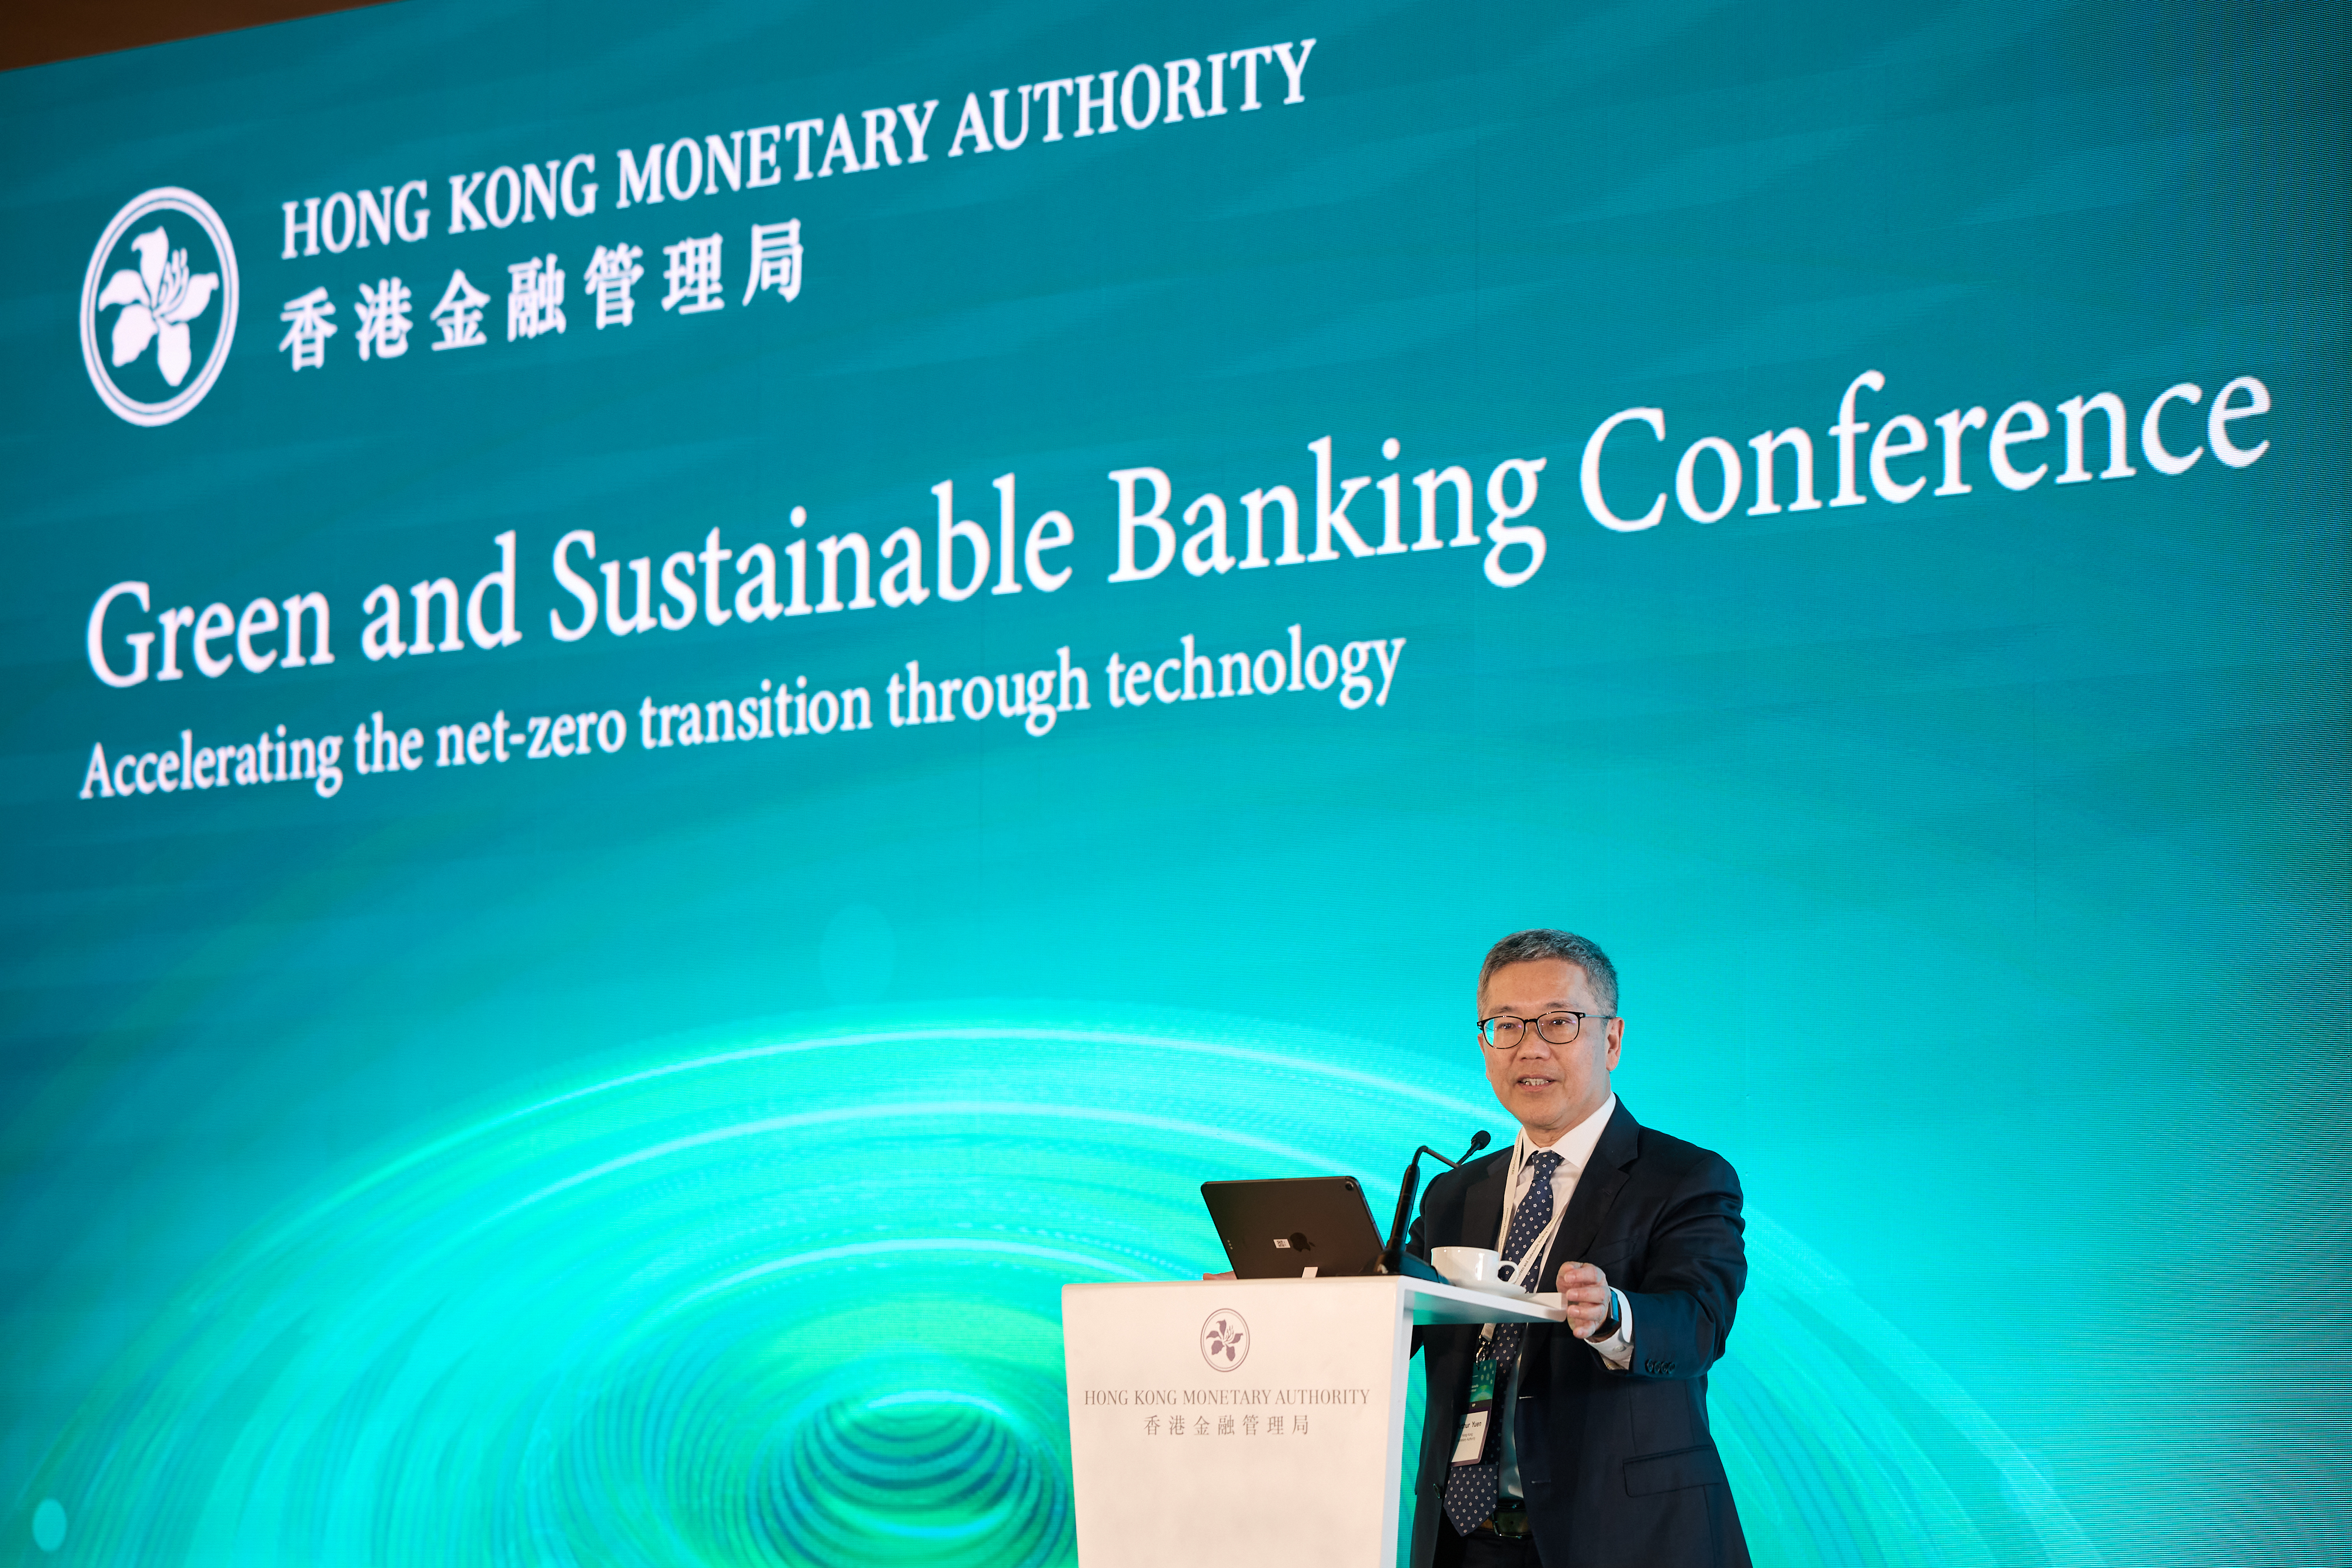 Mr Arthur Yuen, Deputy Chief Executive of the HKMA, delivers opening remarks at the Green and Sustainable Banking Conference.